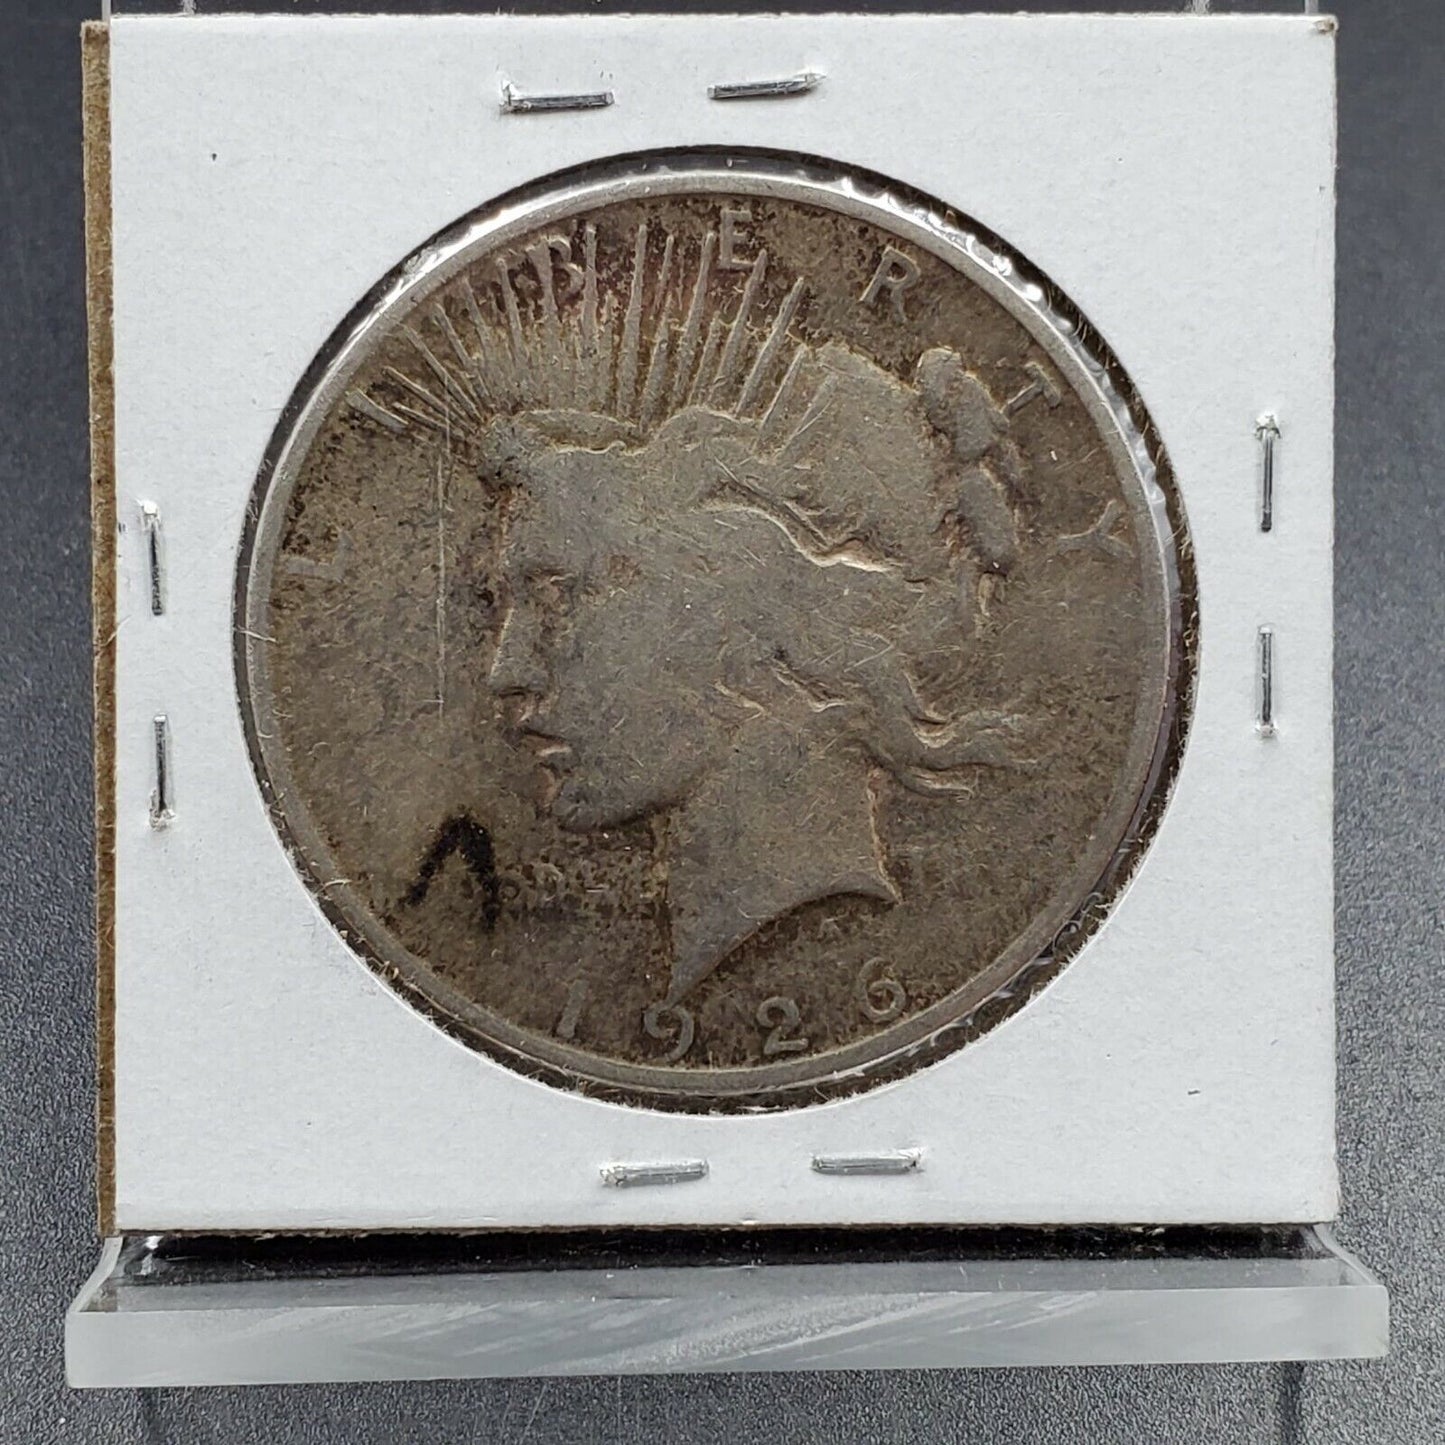 1926 S $1 Peace Silver Eagle Dollar Coin COUNTER STAMPED G. H. W. CIRCULATED